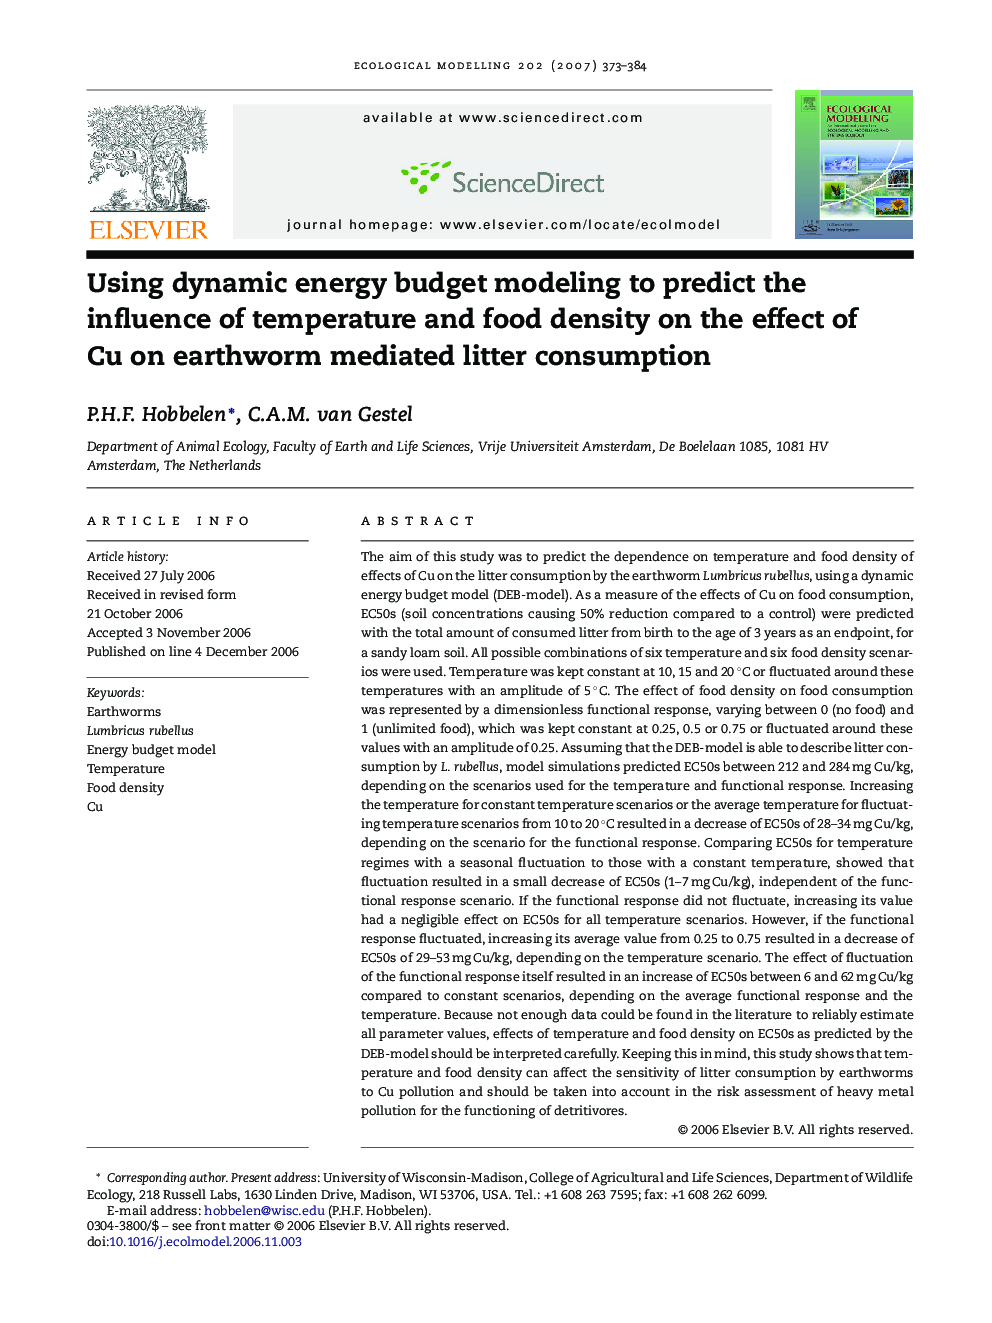 Using dynamic energy budget modeling to predict the influence of temperature and food density on the effect of Cu on earthworm mediated litter consumption